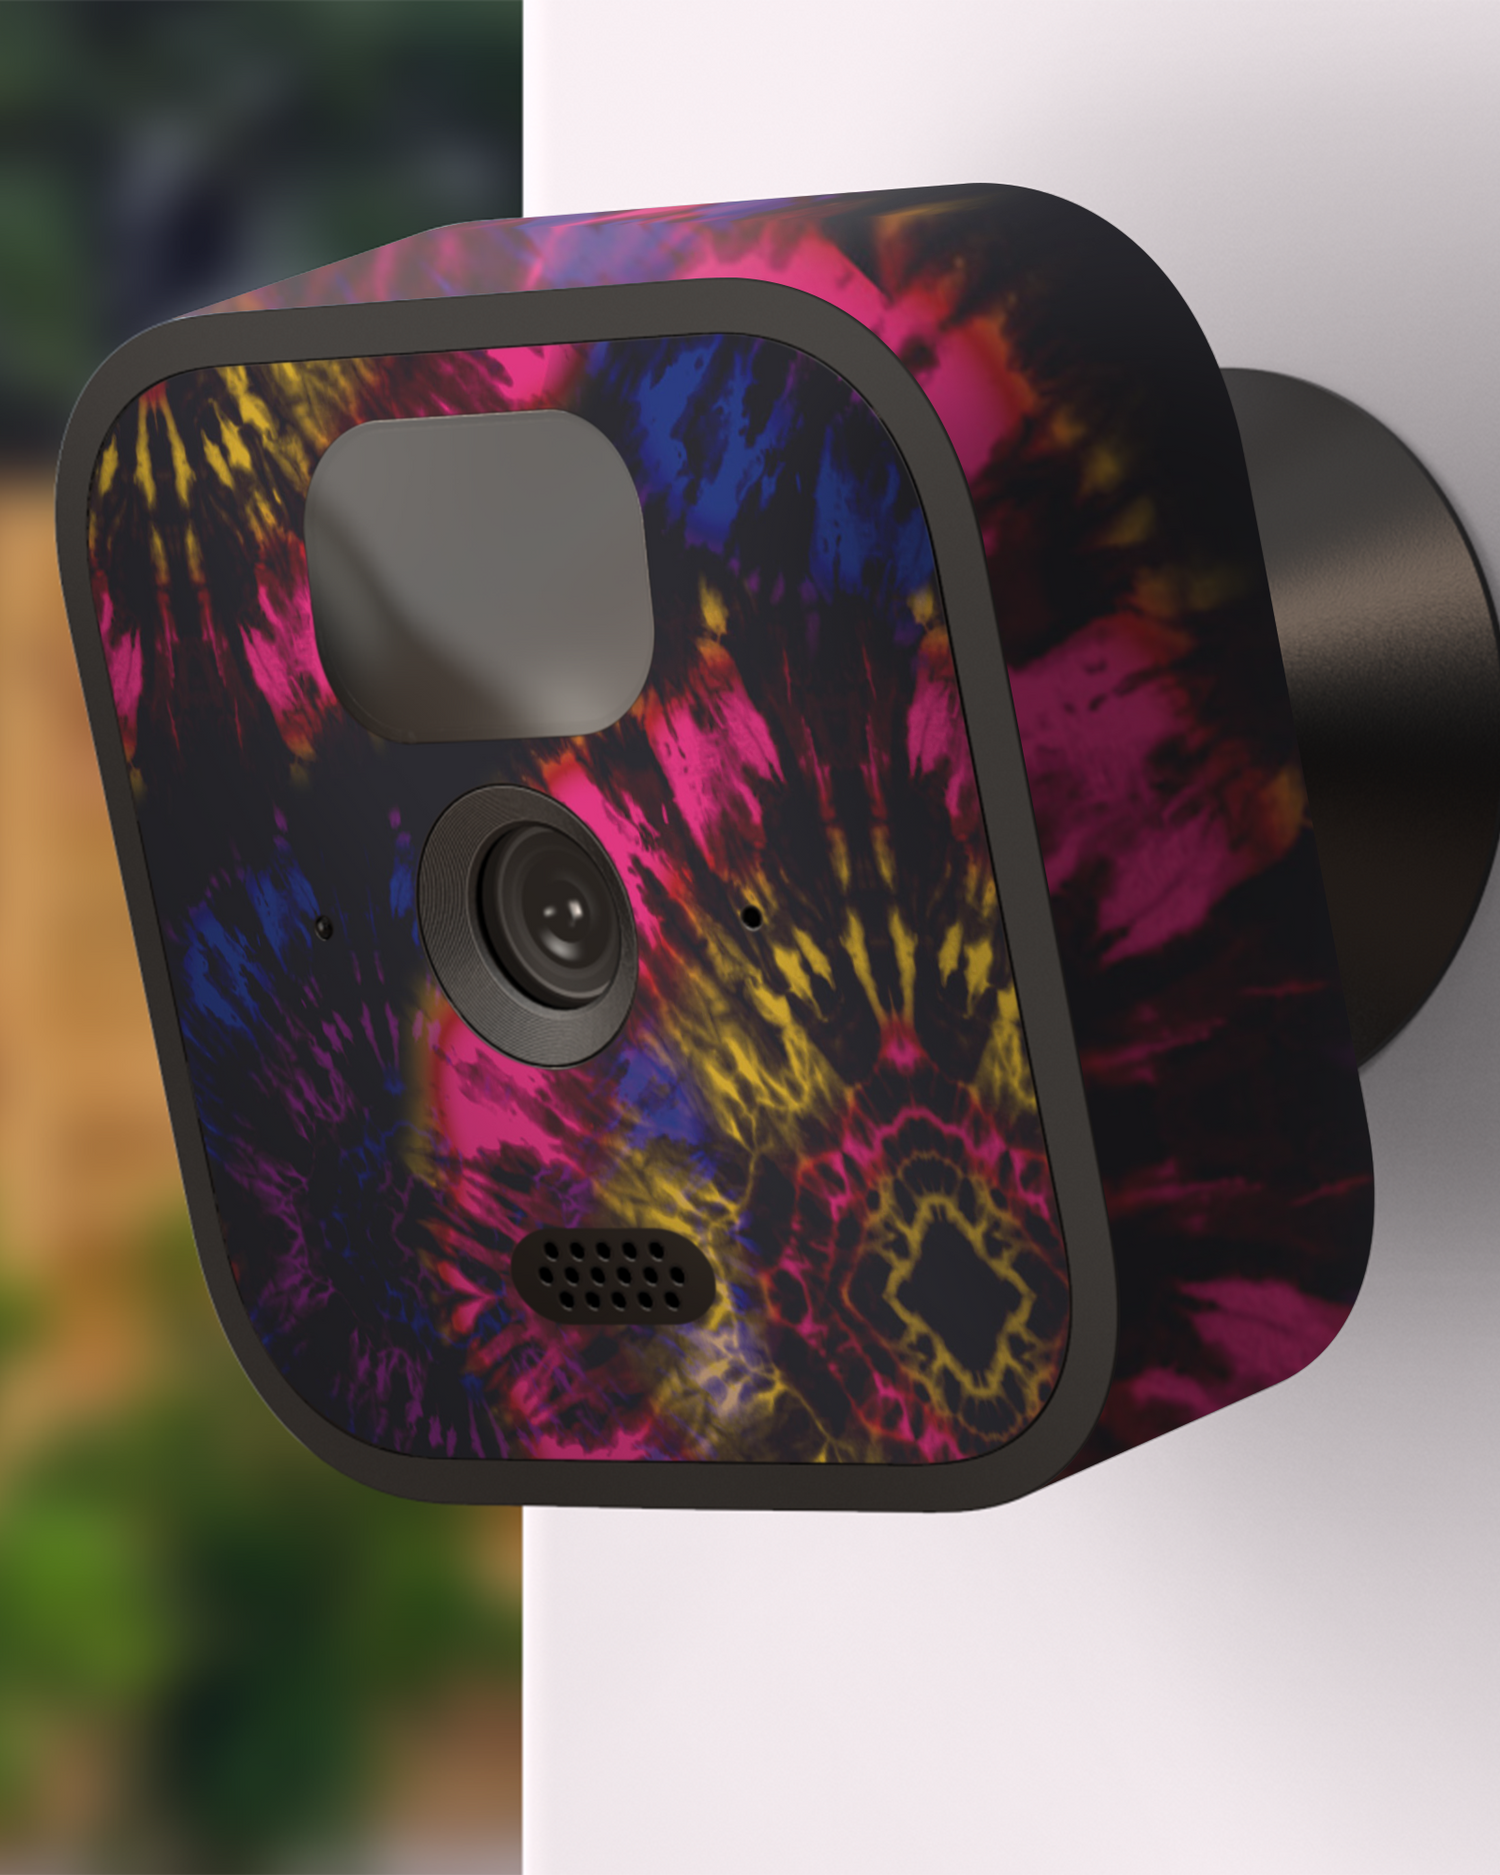 Bleach Tie Dye Camera Skin Blink Outdoor (2020) attached to exterior wall